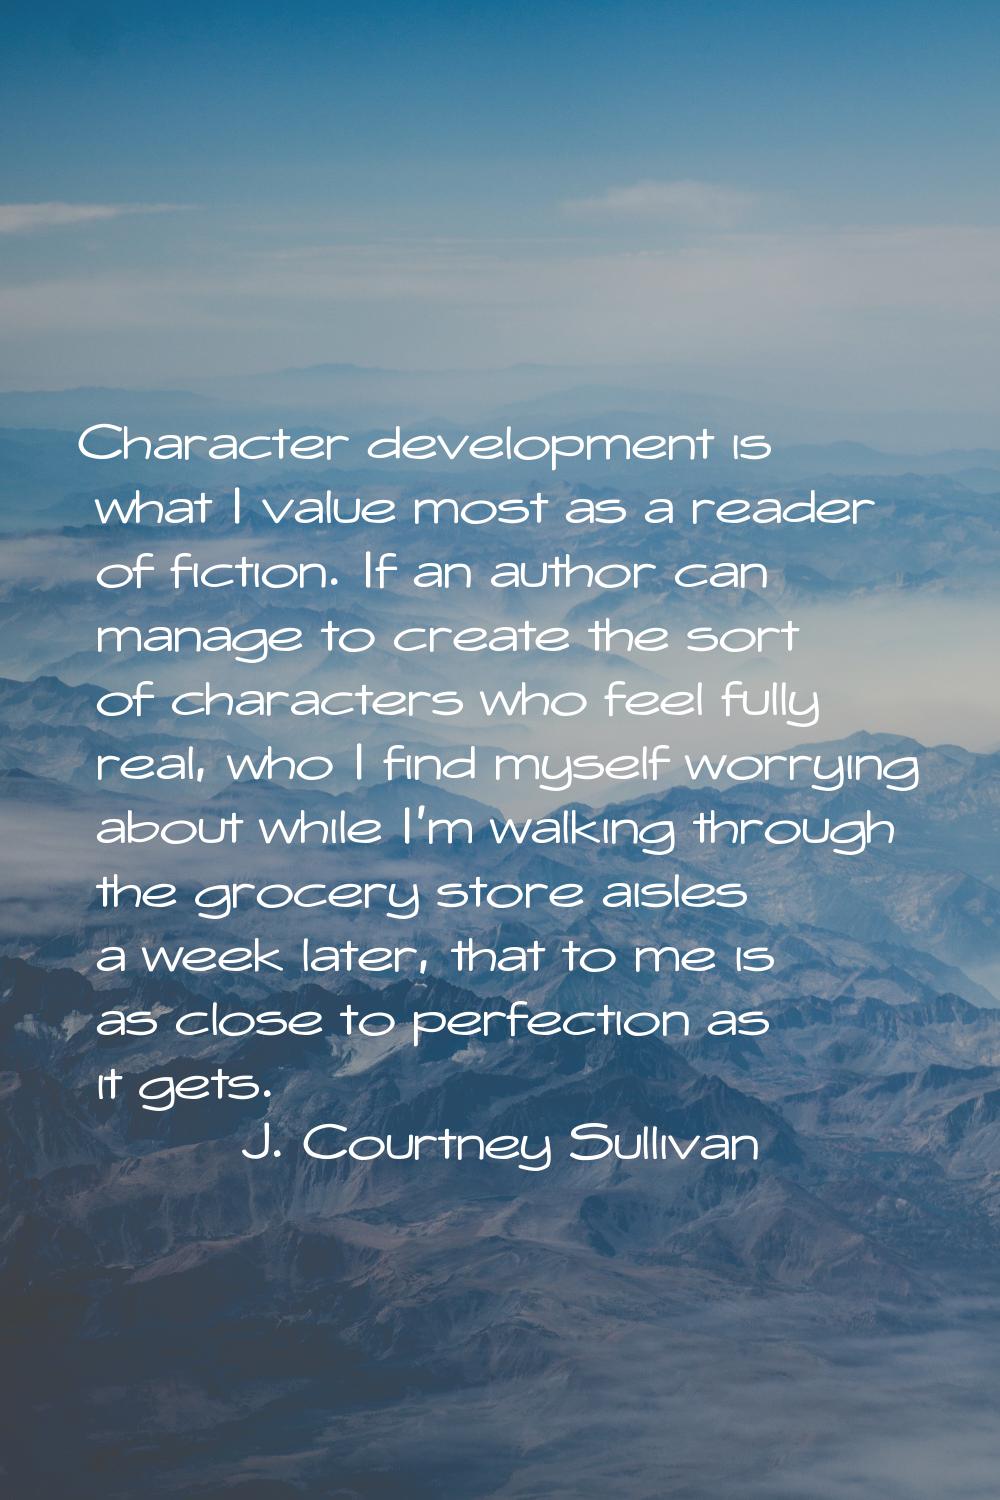 Character development is what I value most as a reader of fiction. If an author can manage to creat